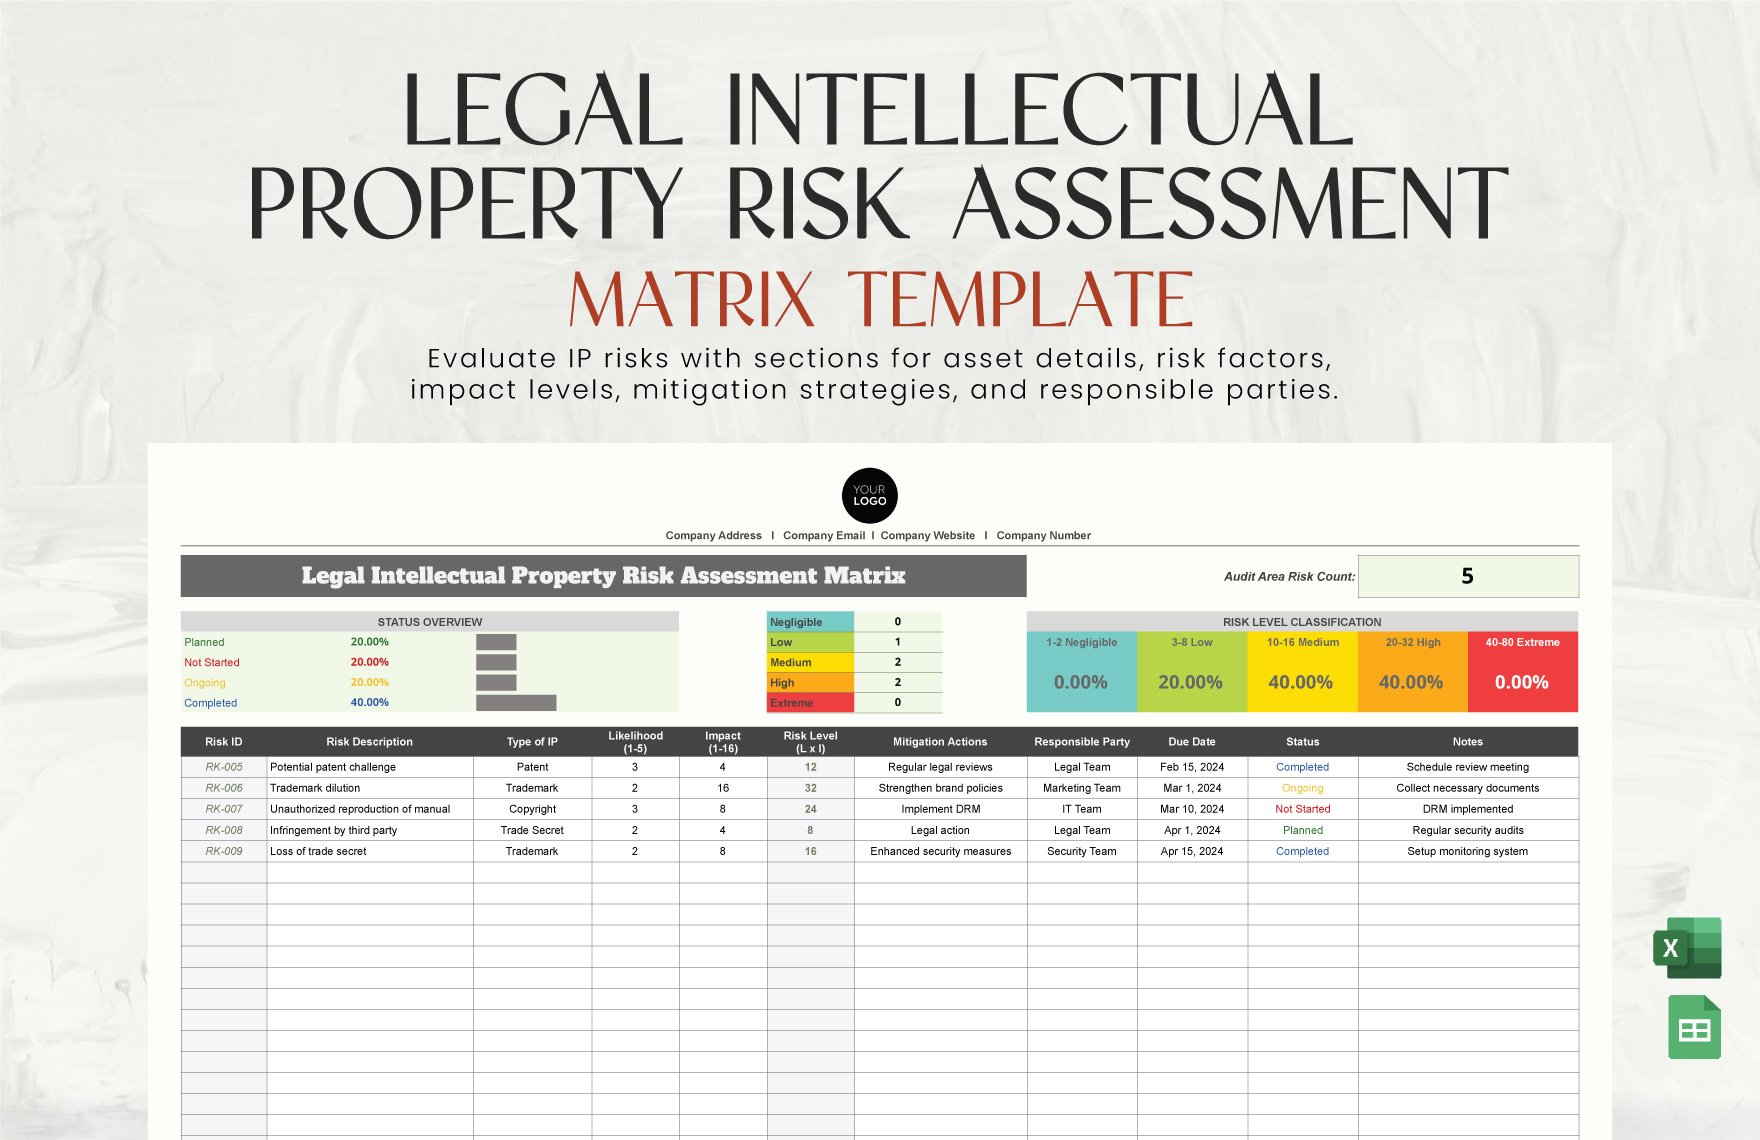 Legal Intellectual Property Risk Assessment Matrix Template in Excel, Google Sheets